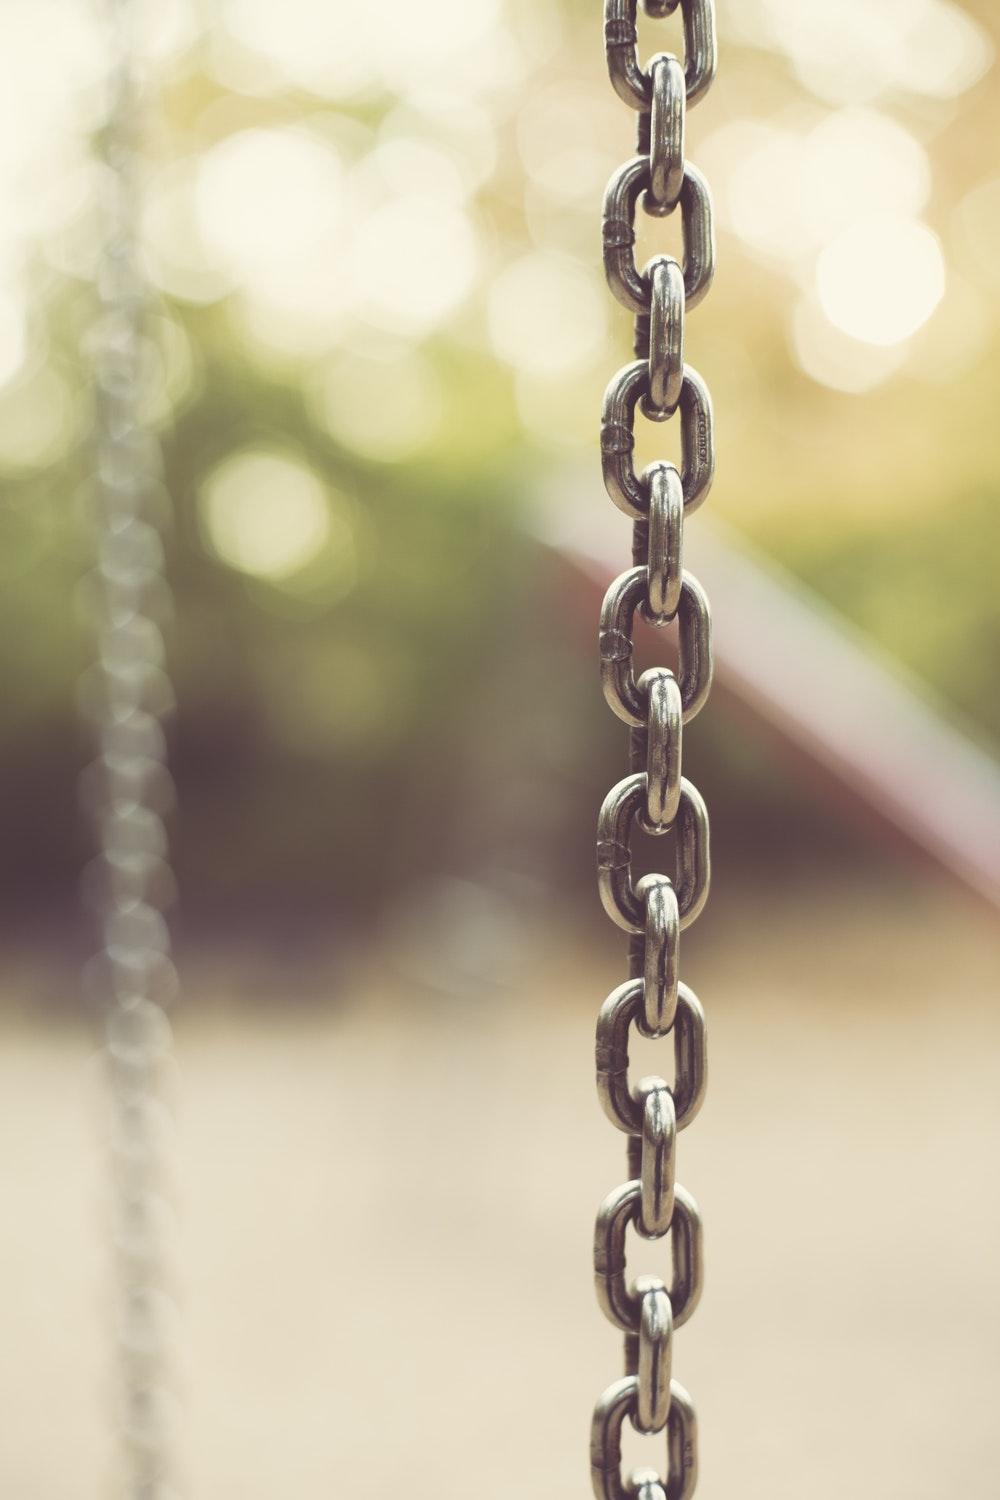 Chain Picture. Download Free Image